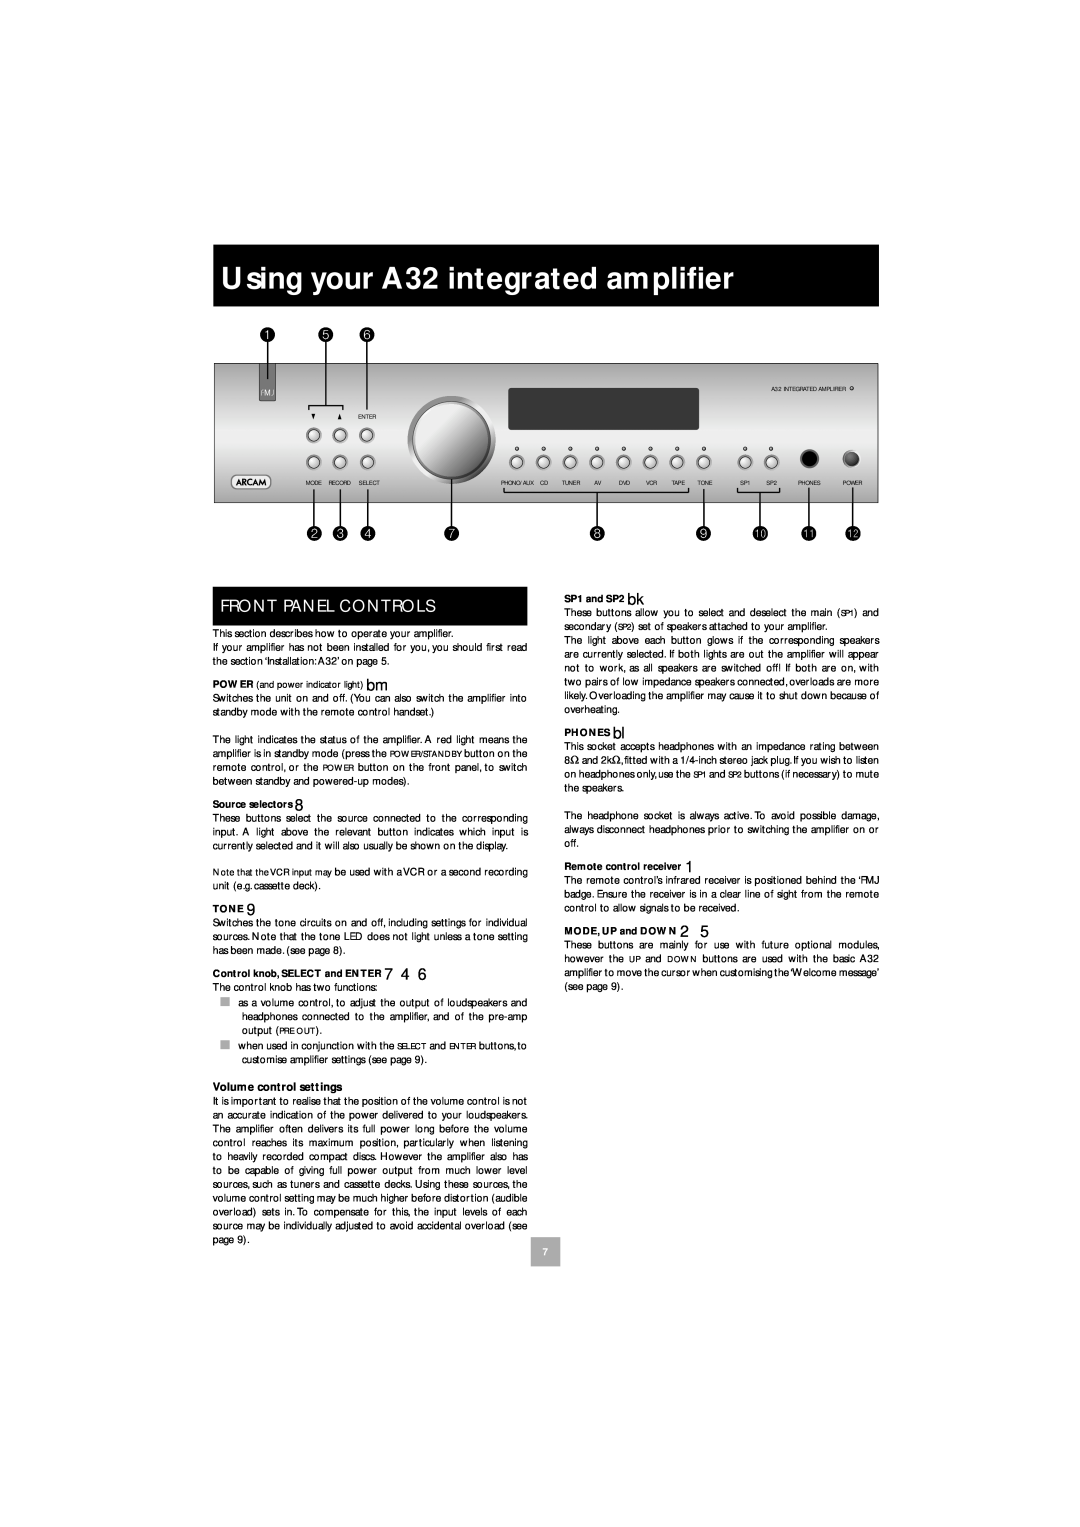 Arcam manual Using your A32 integrated ampliﬁer, bk bl bm, Front Panel Controls 